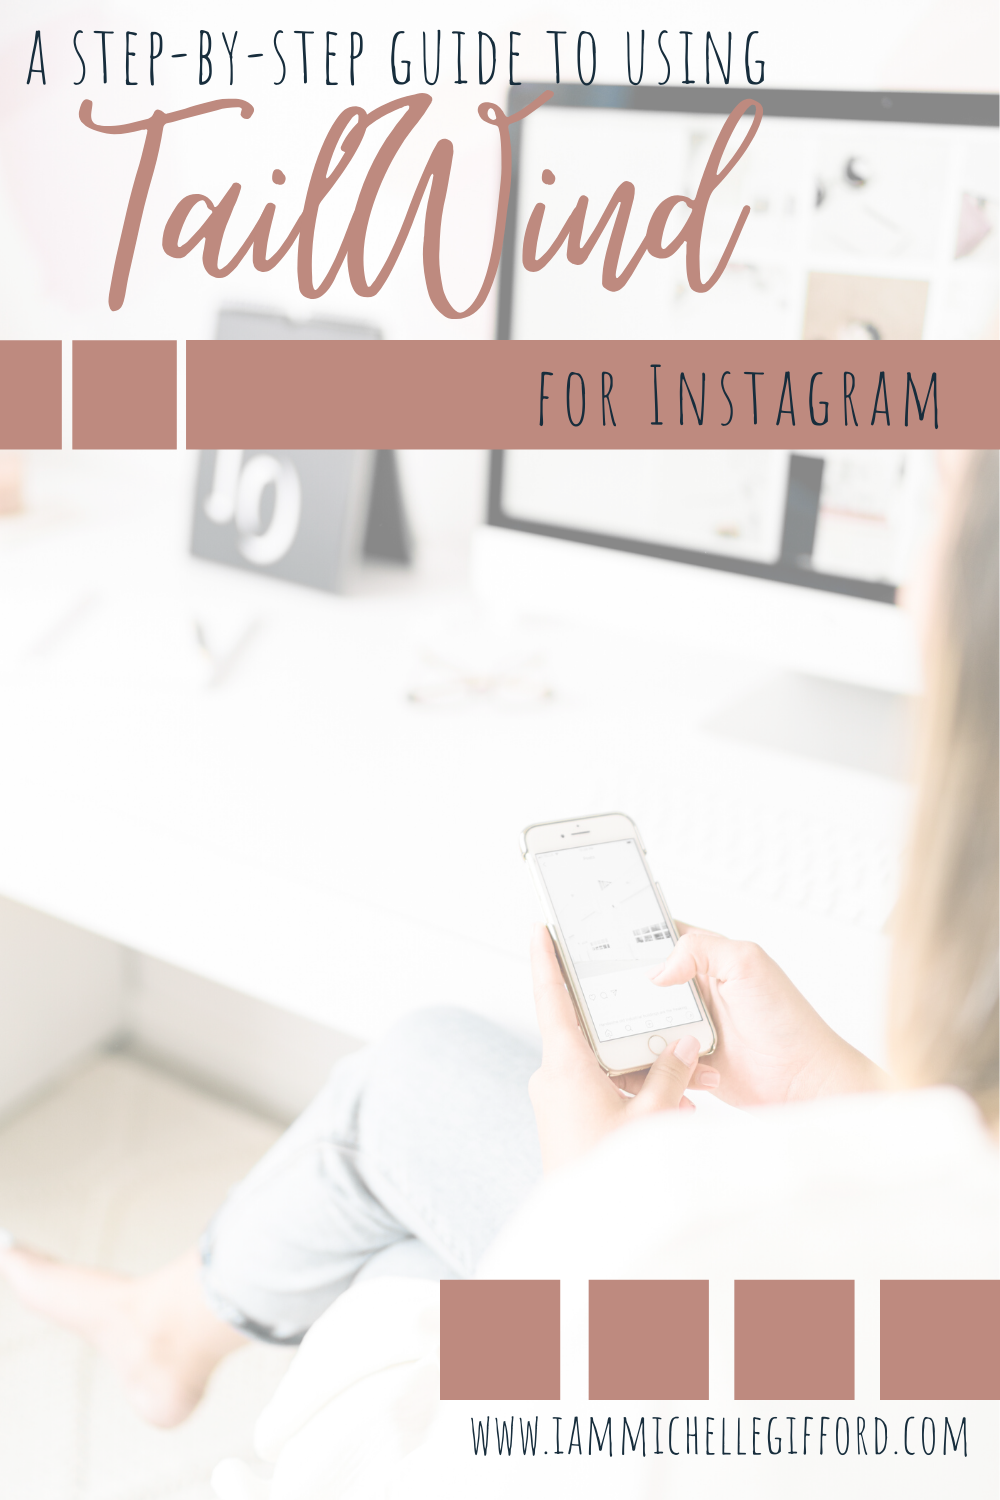 How to Use TailWind for Instagram A step-by-step guide www.iammichellegifford.com